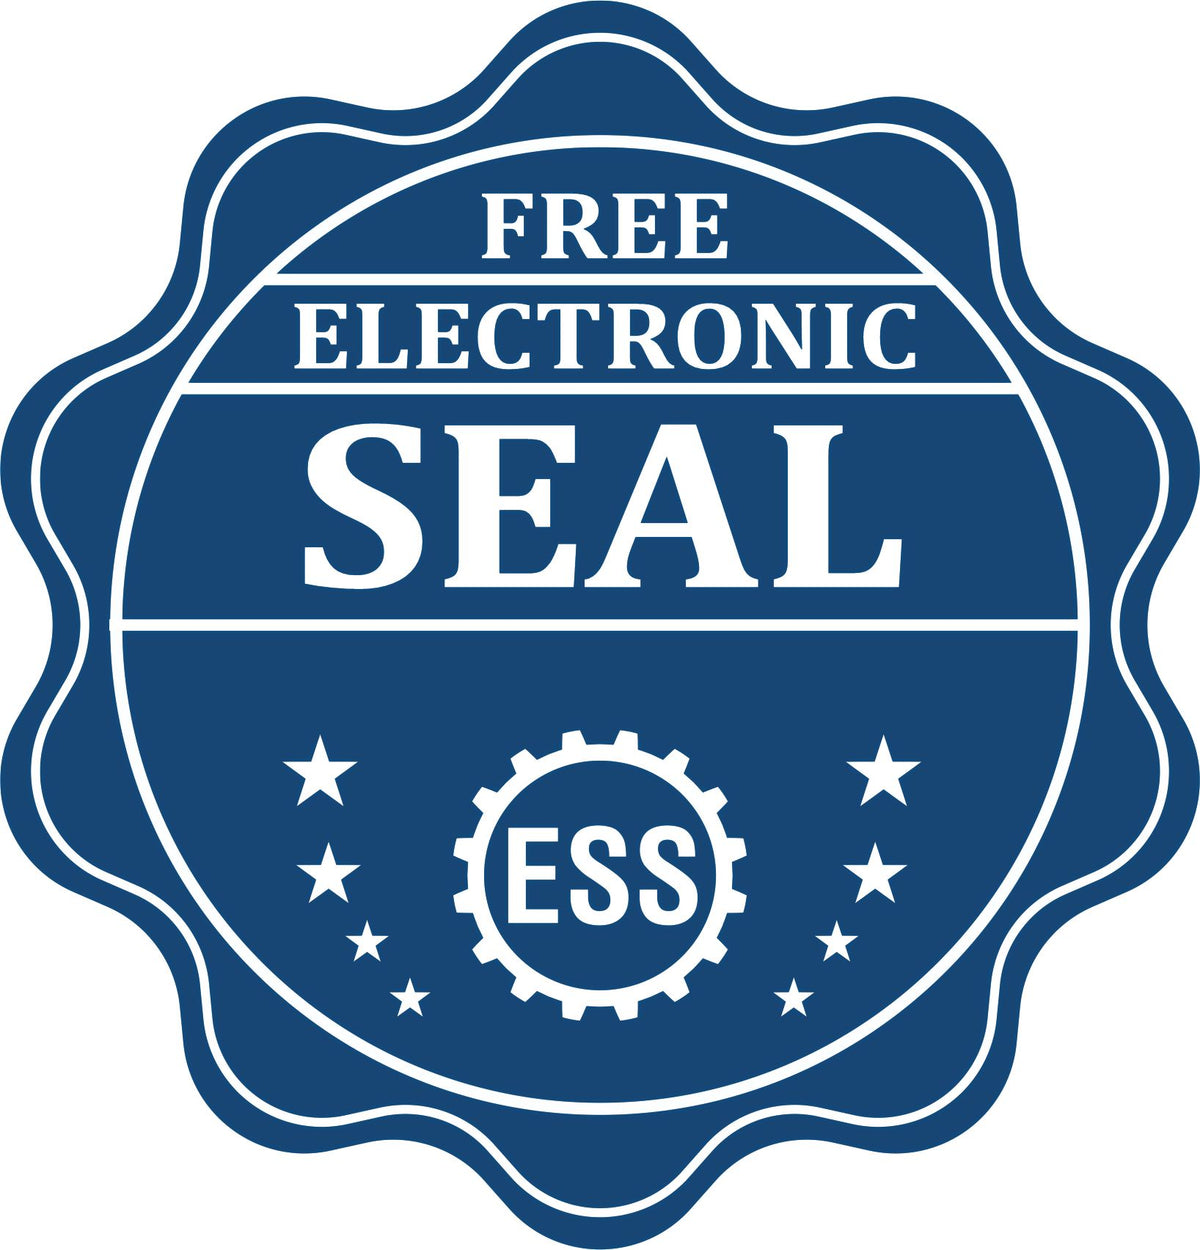 A badge showing a free electronic seal for the State of Delaware Long Reach Architectural Embossing Seal with stars and the ESS gear on the emblem.